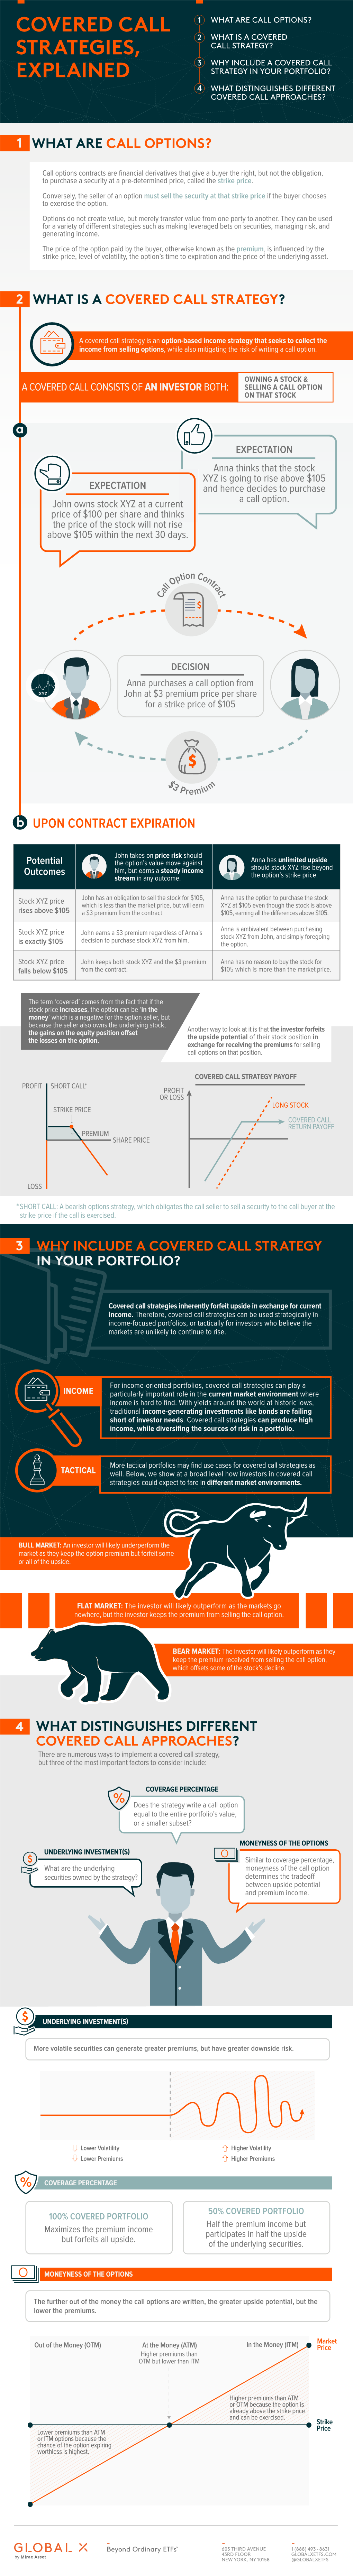 Covered Call Strategies, Explained